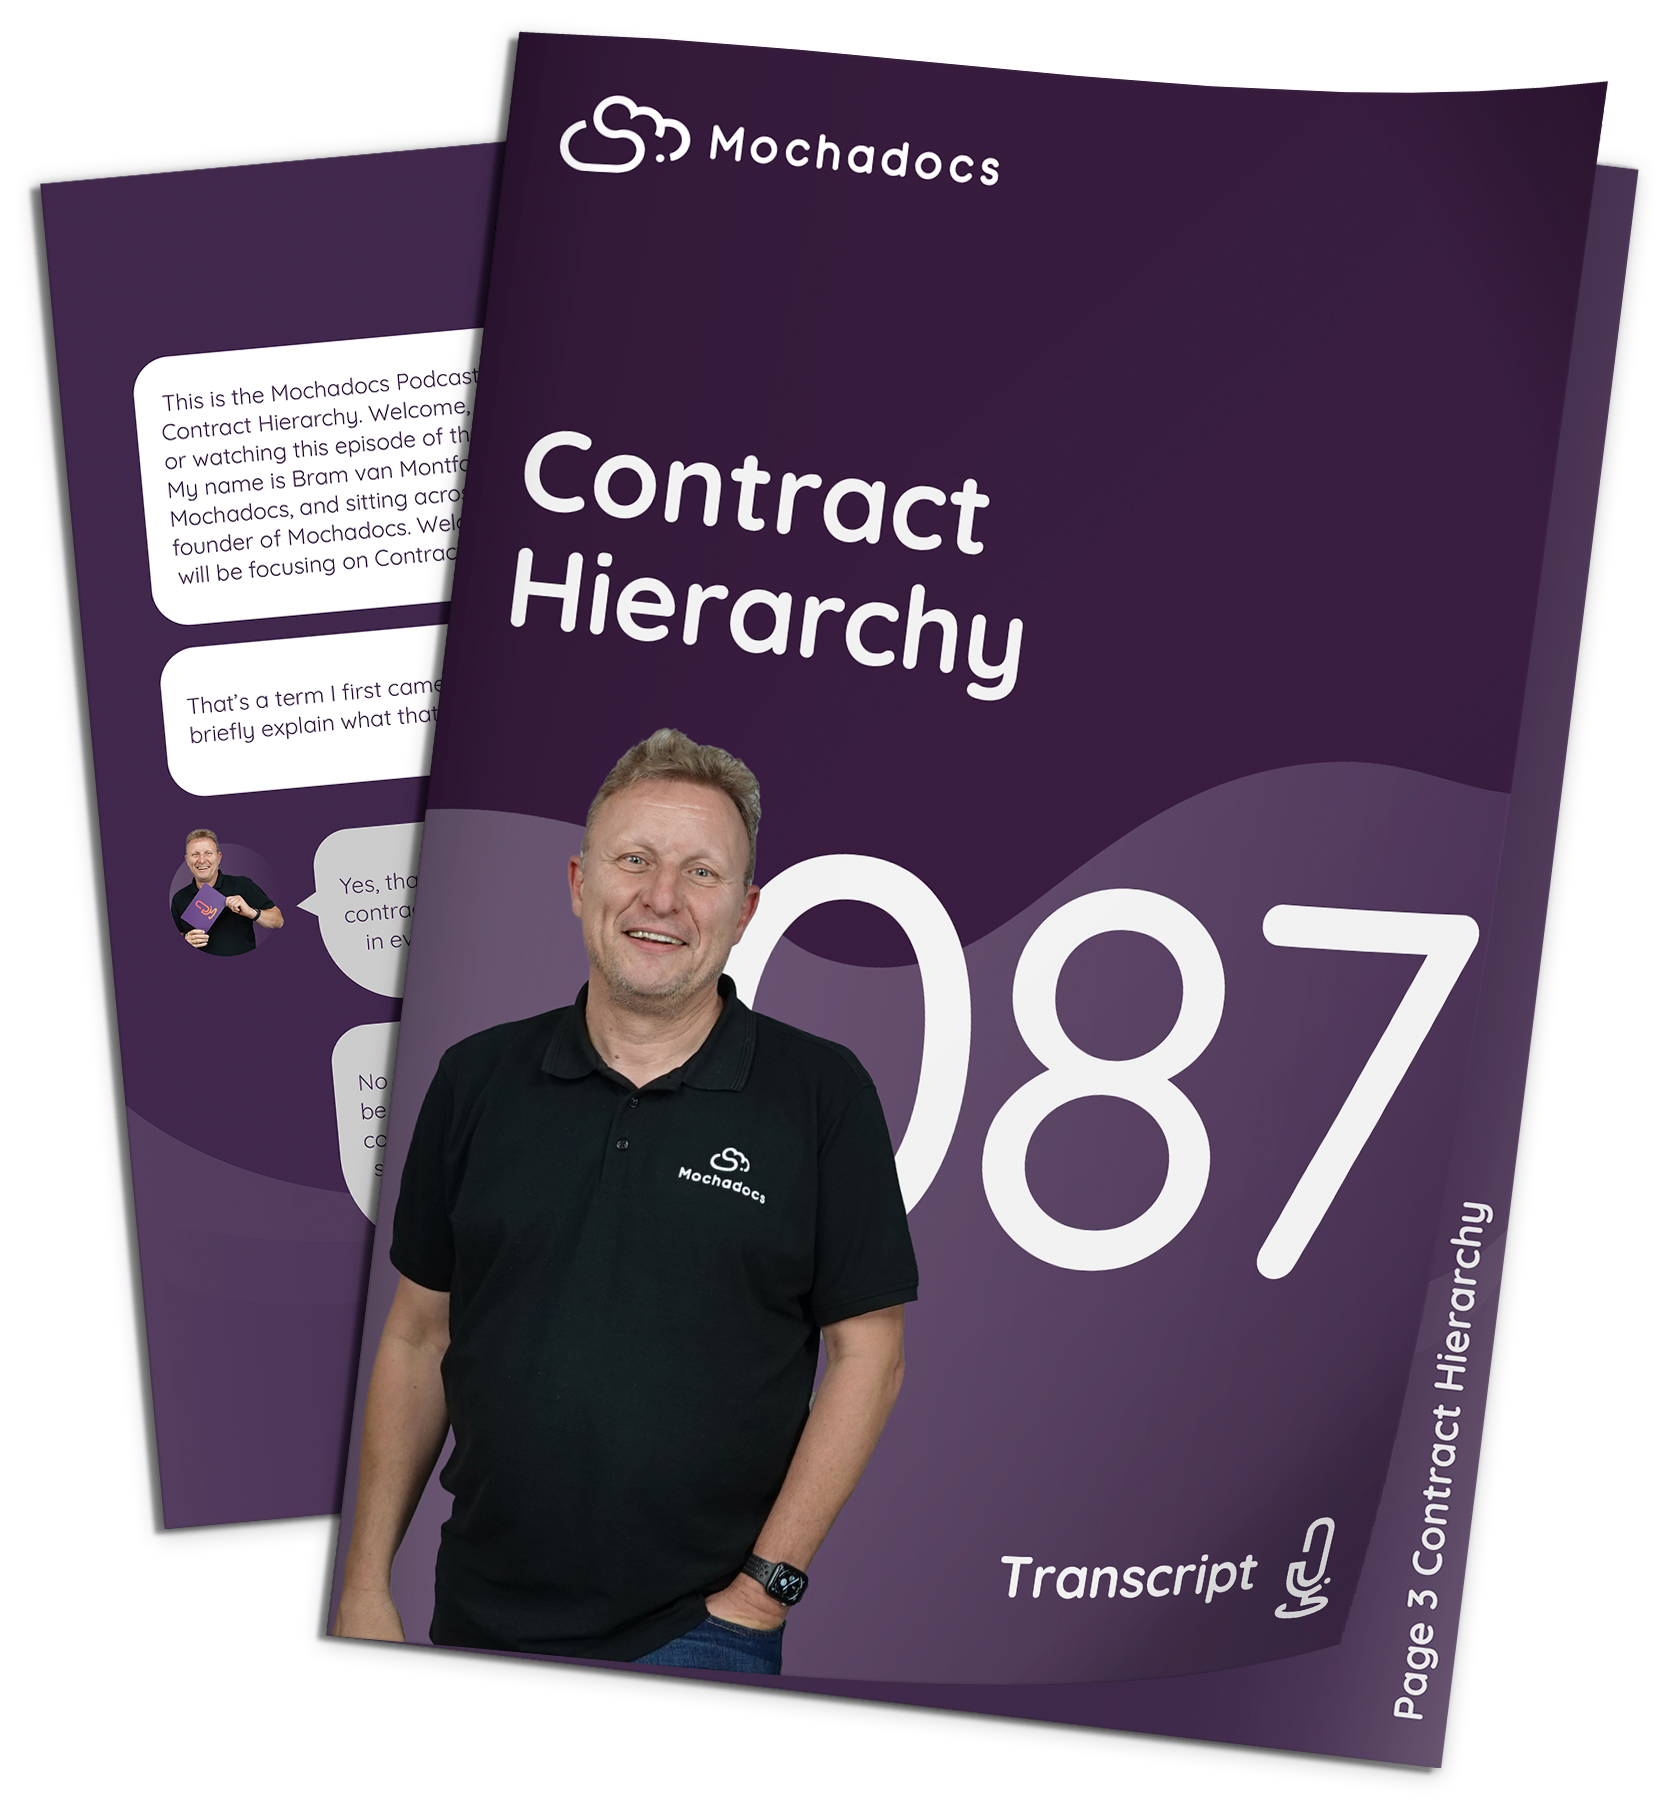 Mochadocs - Contract Lifecycle Management - Transcripts - Contract Hierarchy